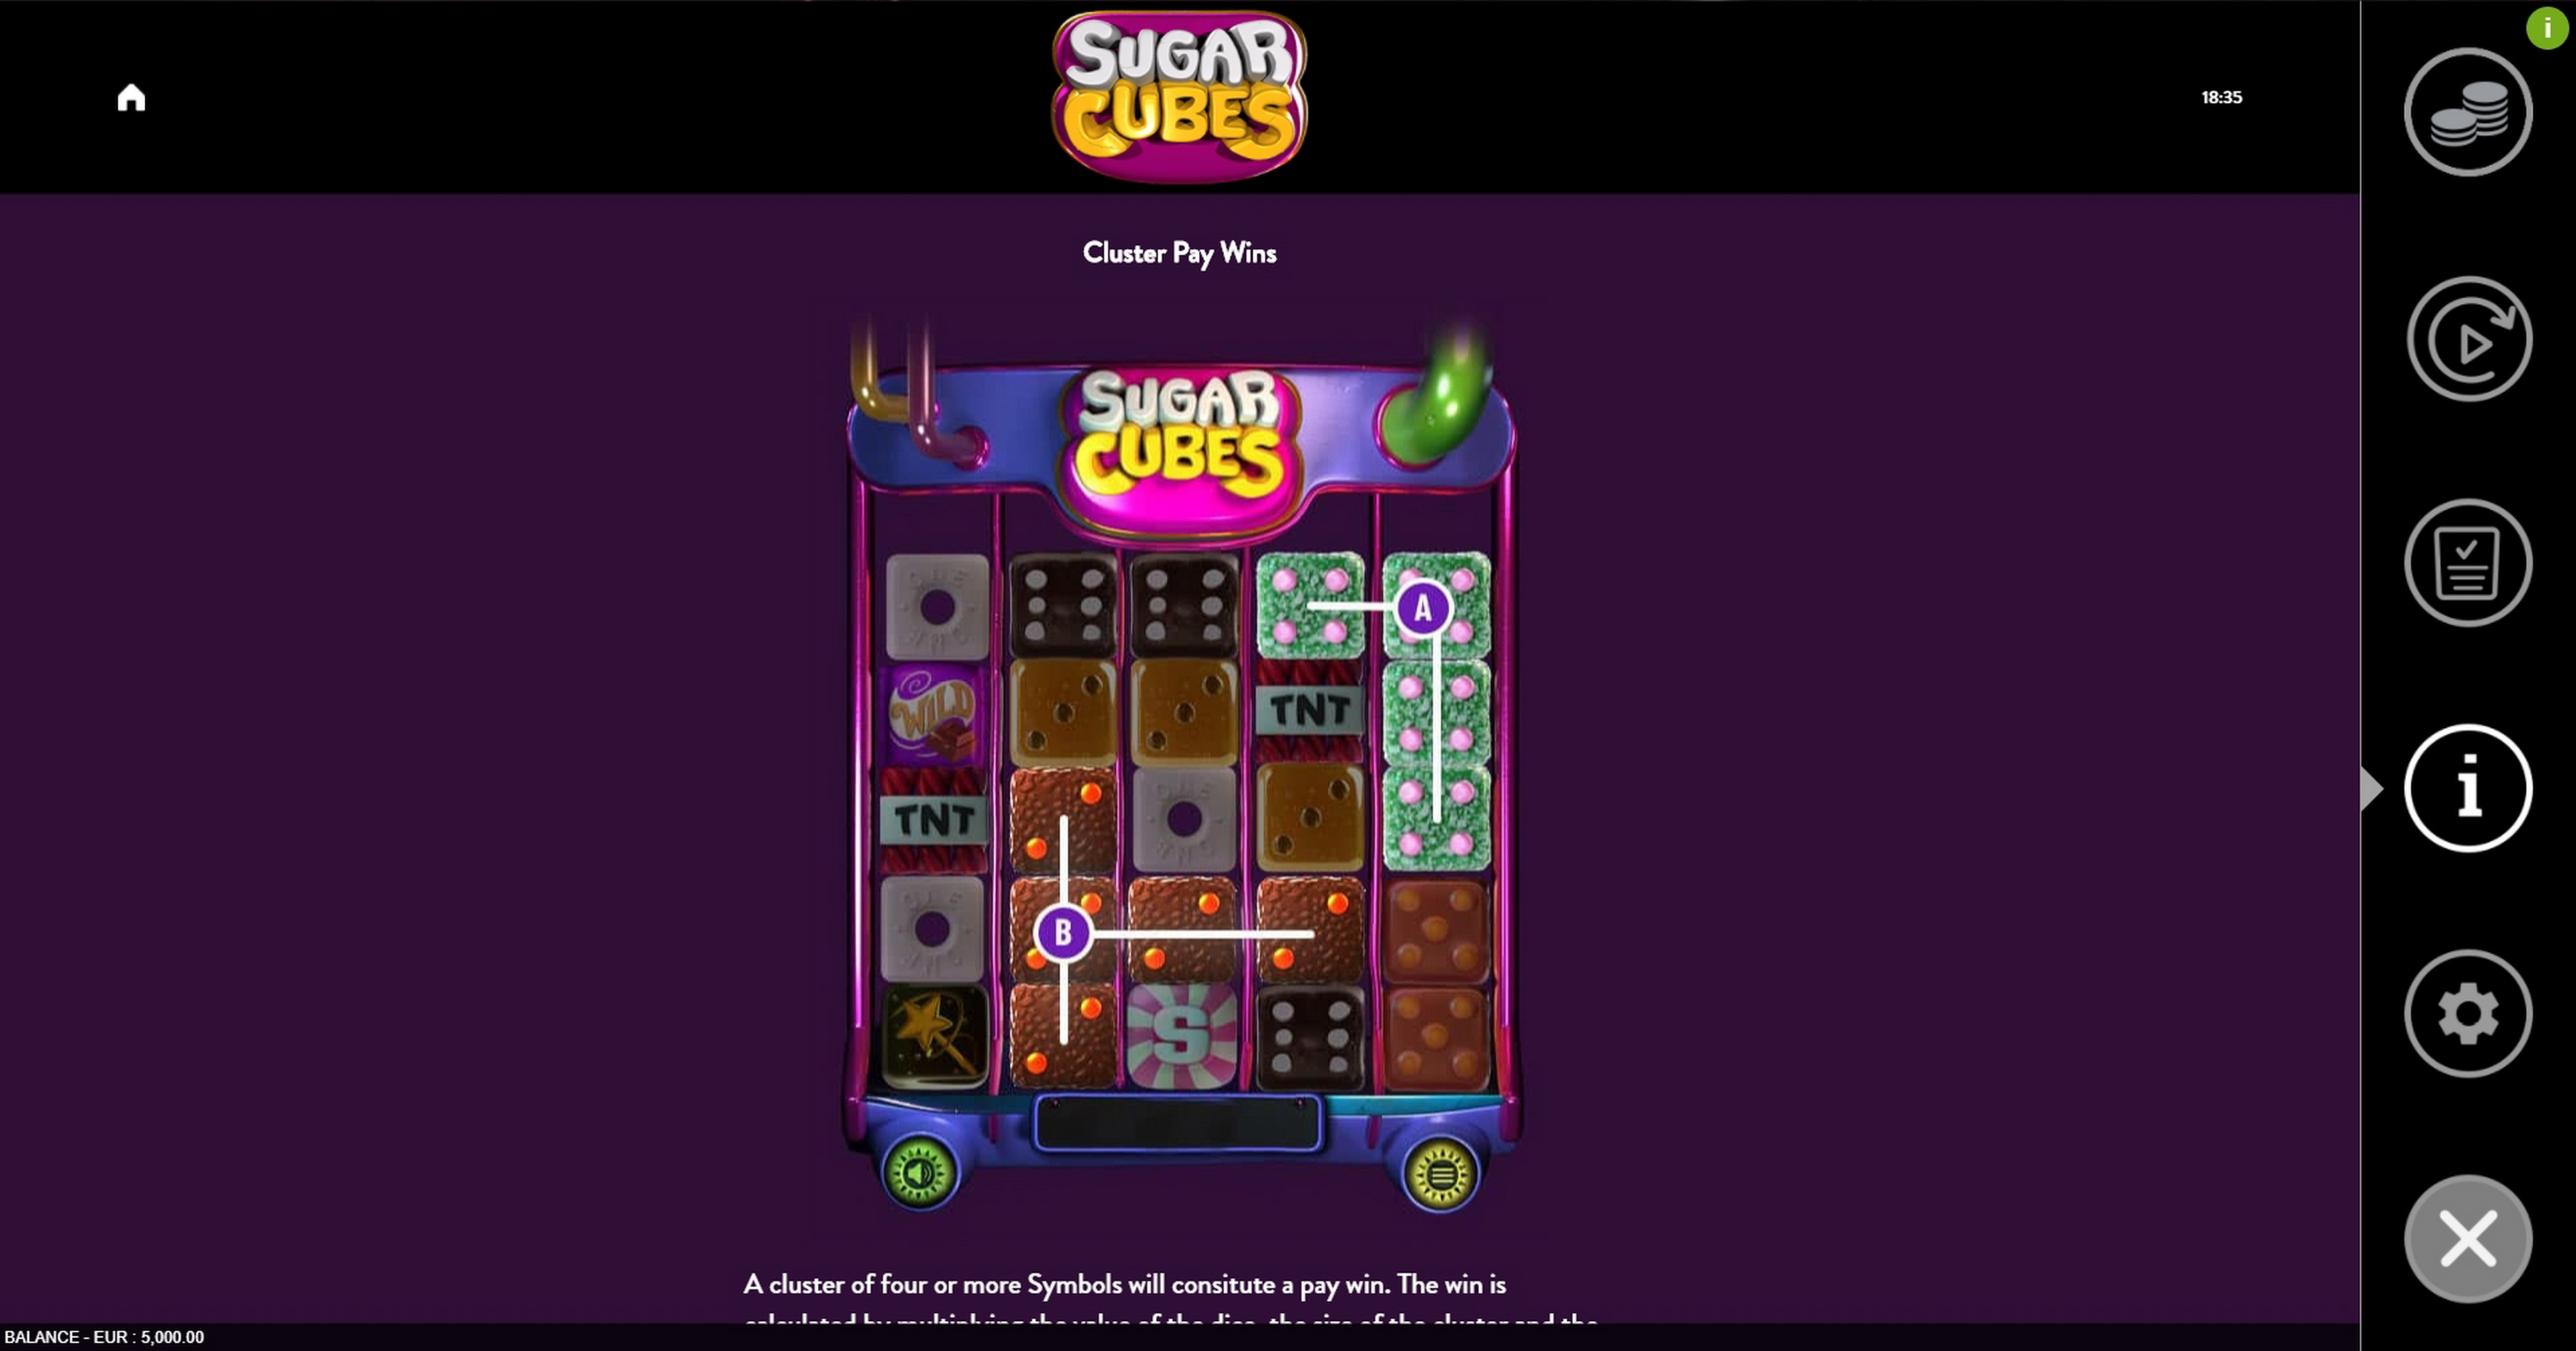 Info of Sugar Cubes Slot Game by DiceLab